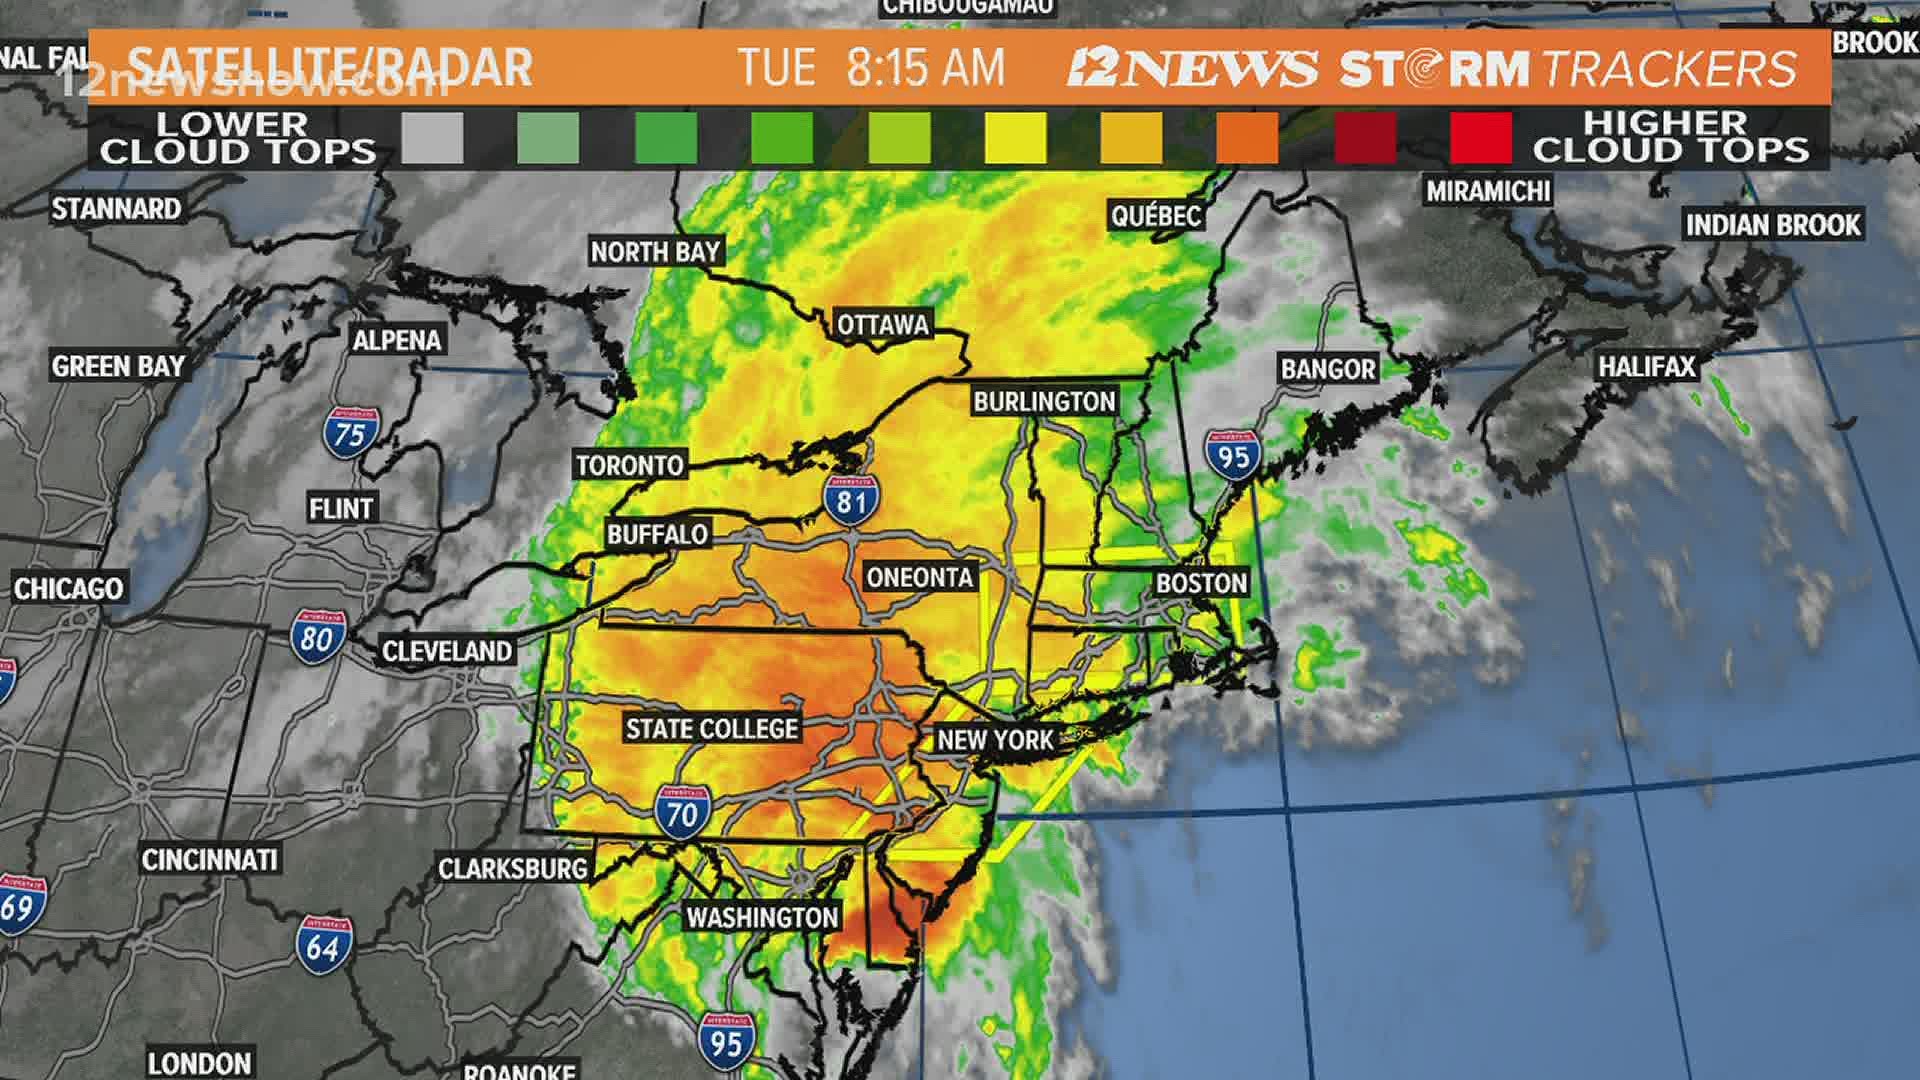 A tornado watch has been issued for several major metropolitan areas, including New York City and Philadelphia, as Tropical Storm Isaias travels up the East Coast.